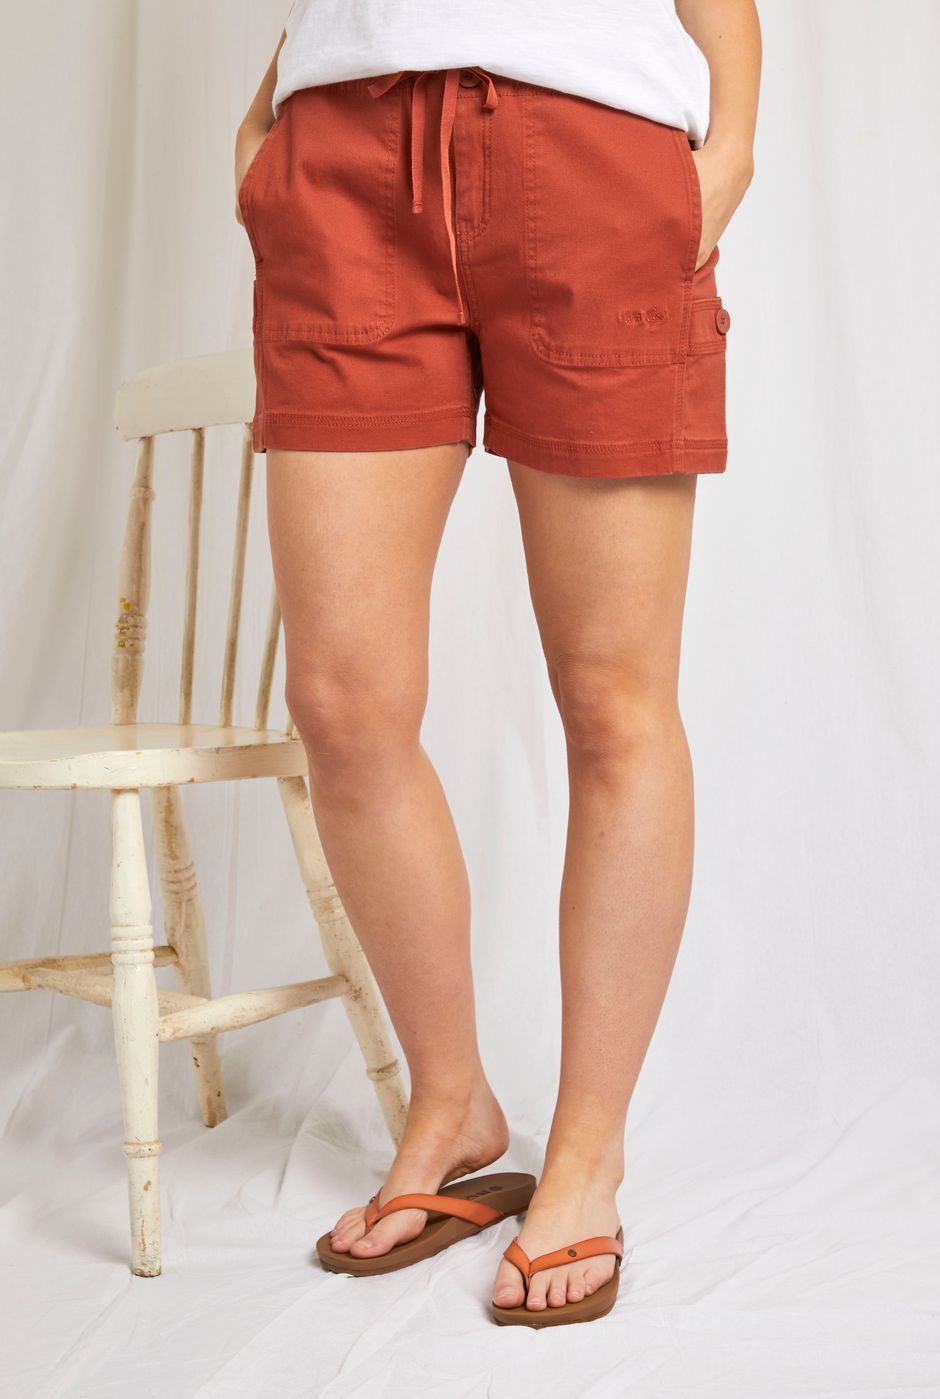 Willoughby Organic Cotton Summer Shorts Baked clay